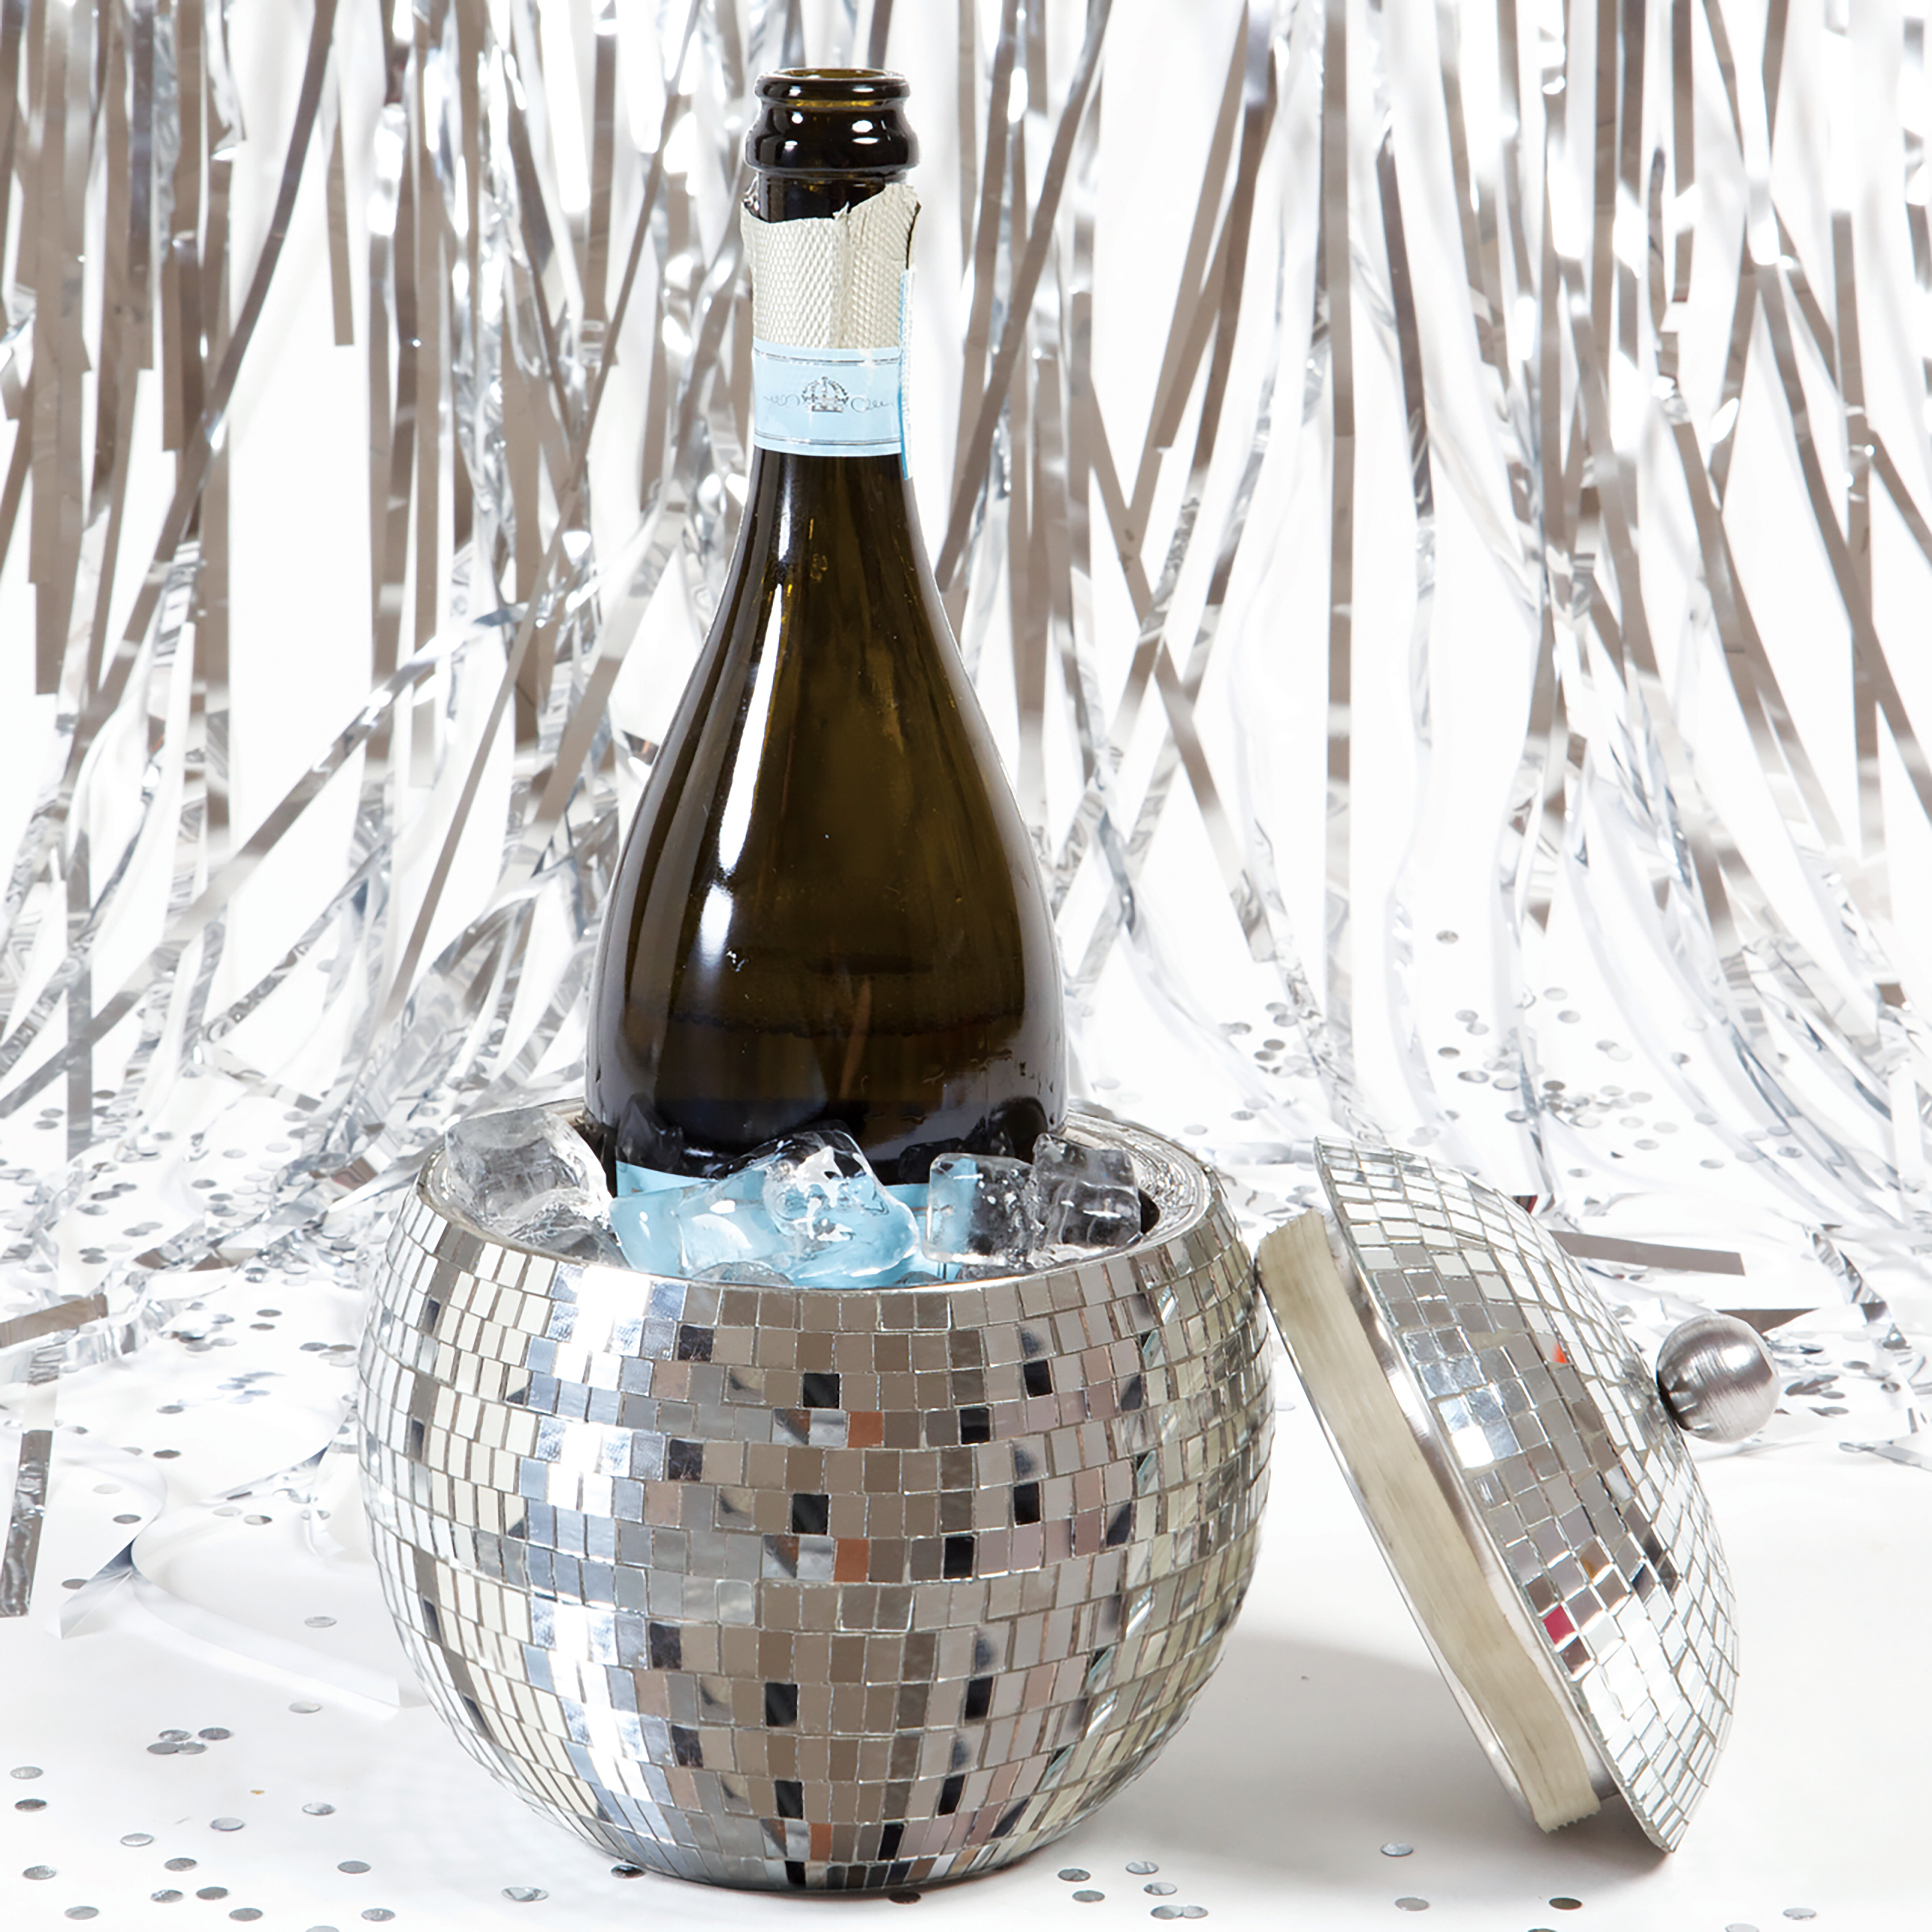 Champagne Ice Bucket With Silver Finish and Metal Build With Premium  Quality and Look ice bucket